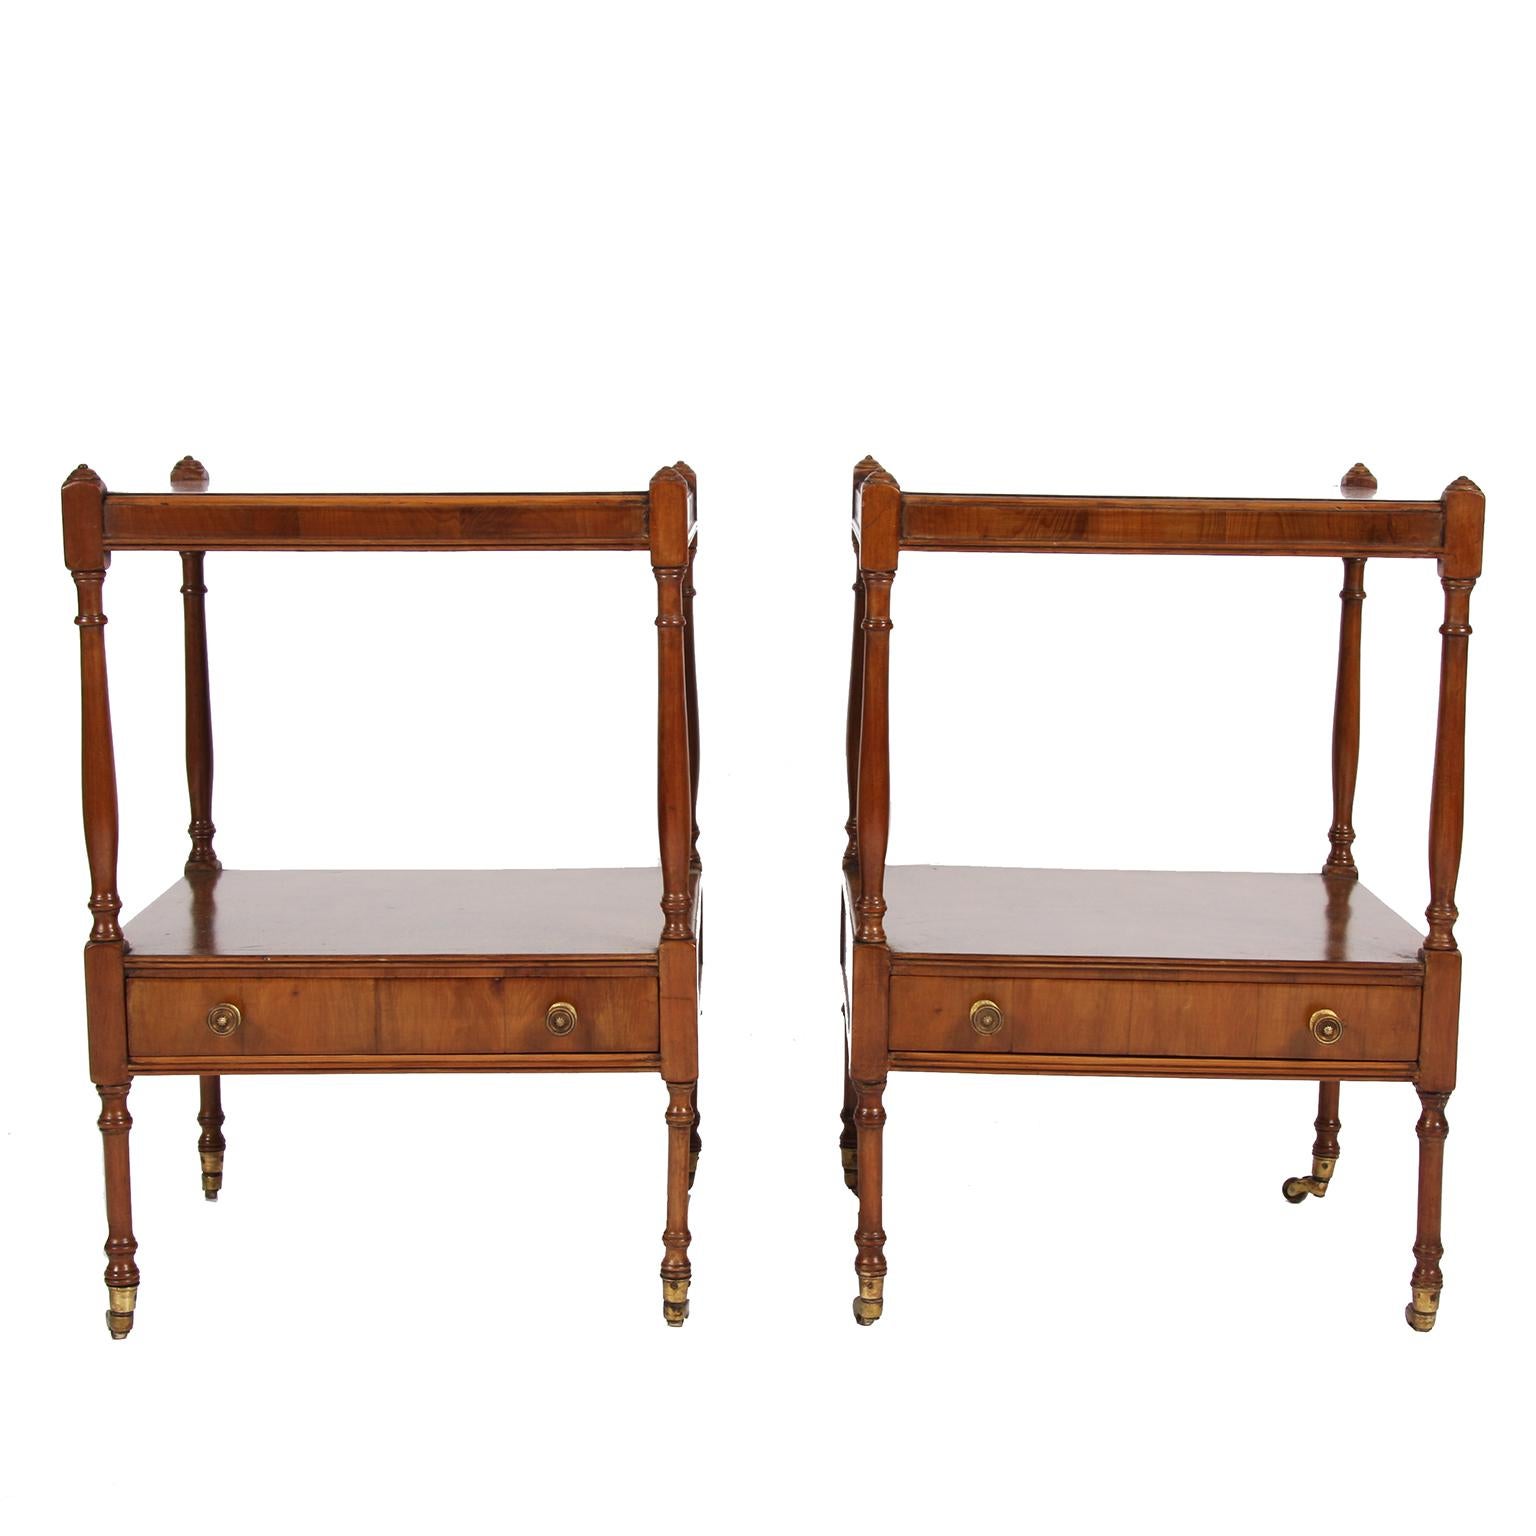 English early 20th century

An elegant pair of elm bedside tables. With a lovely grain to the wood and brass castors. 
 